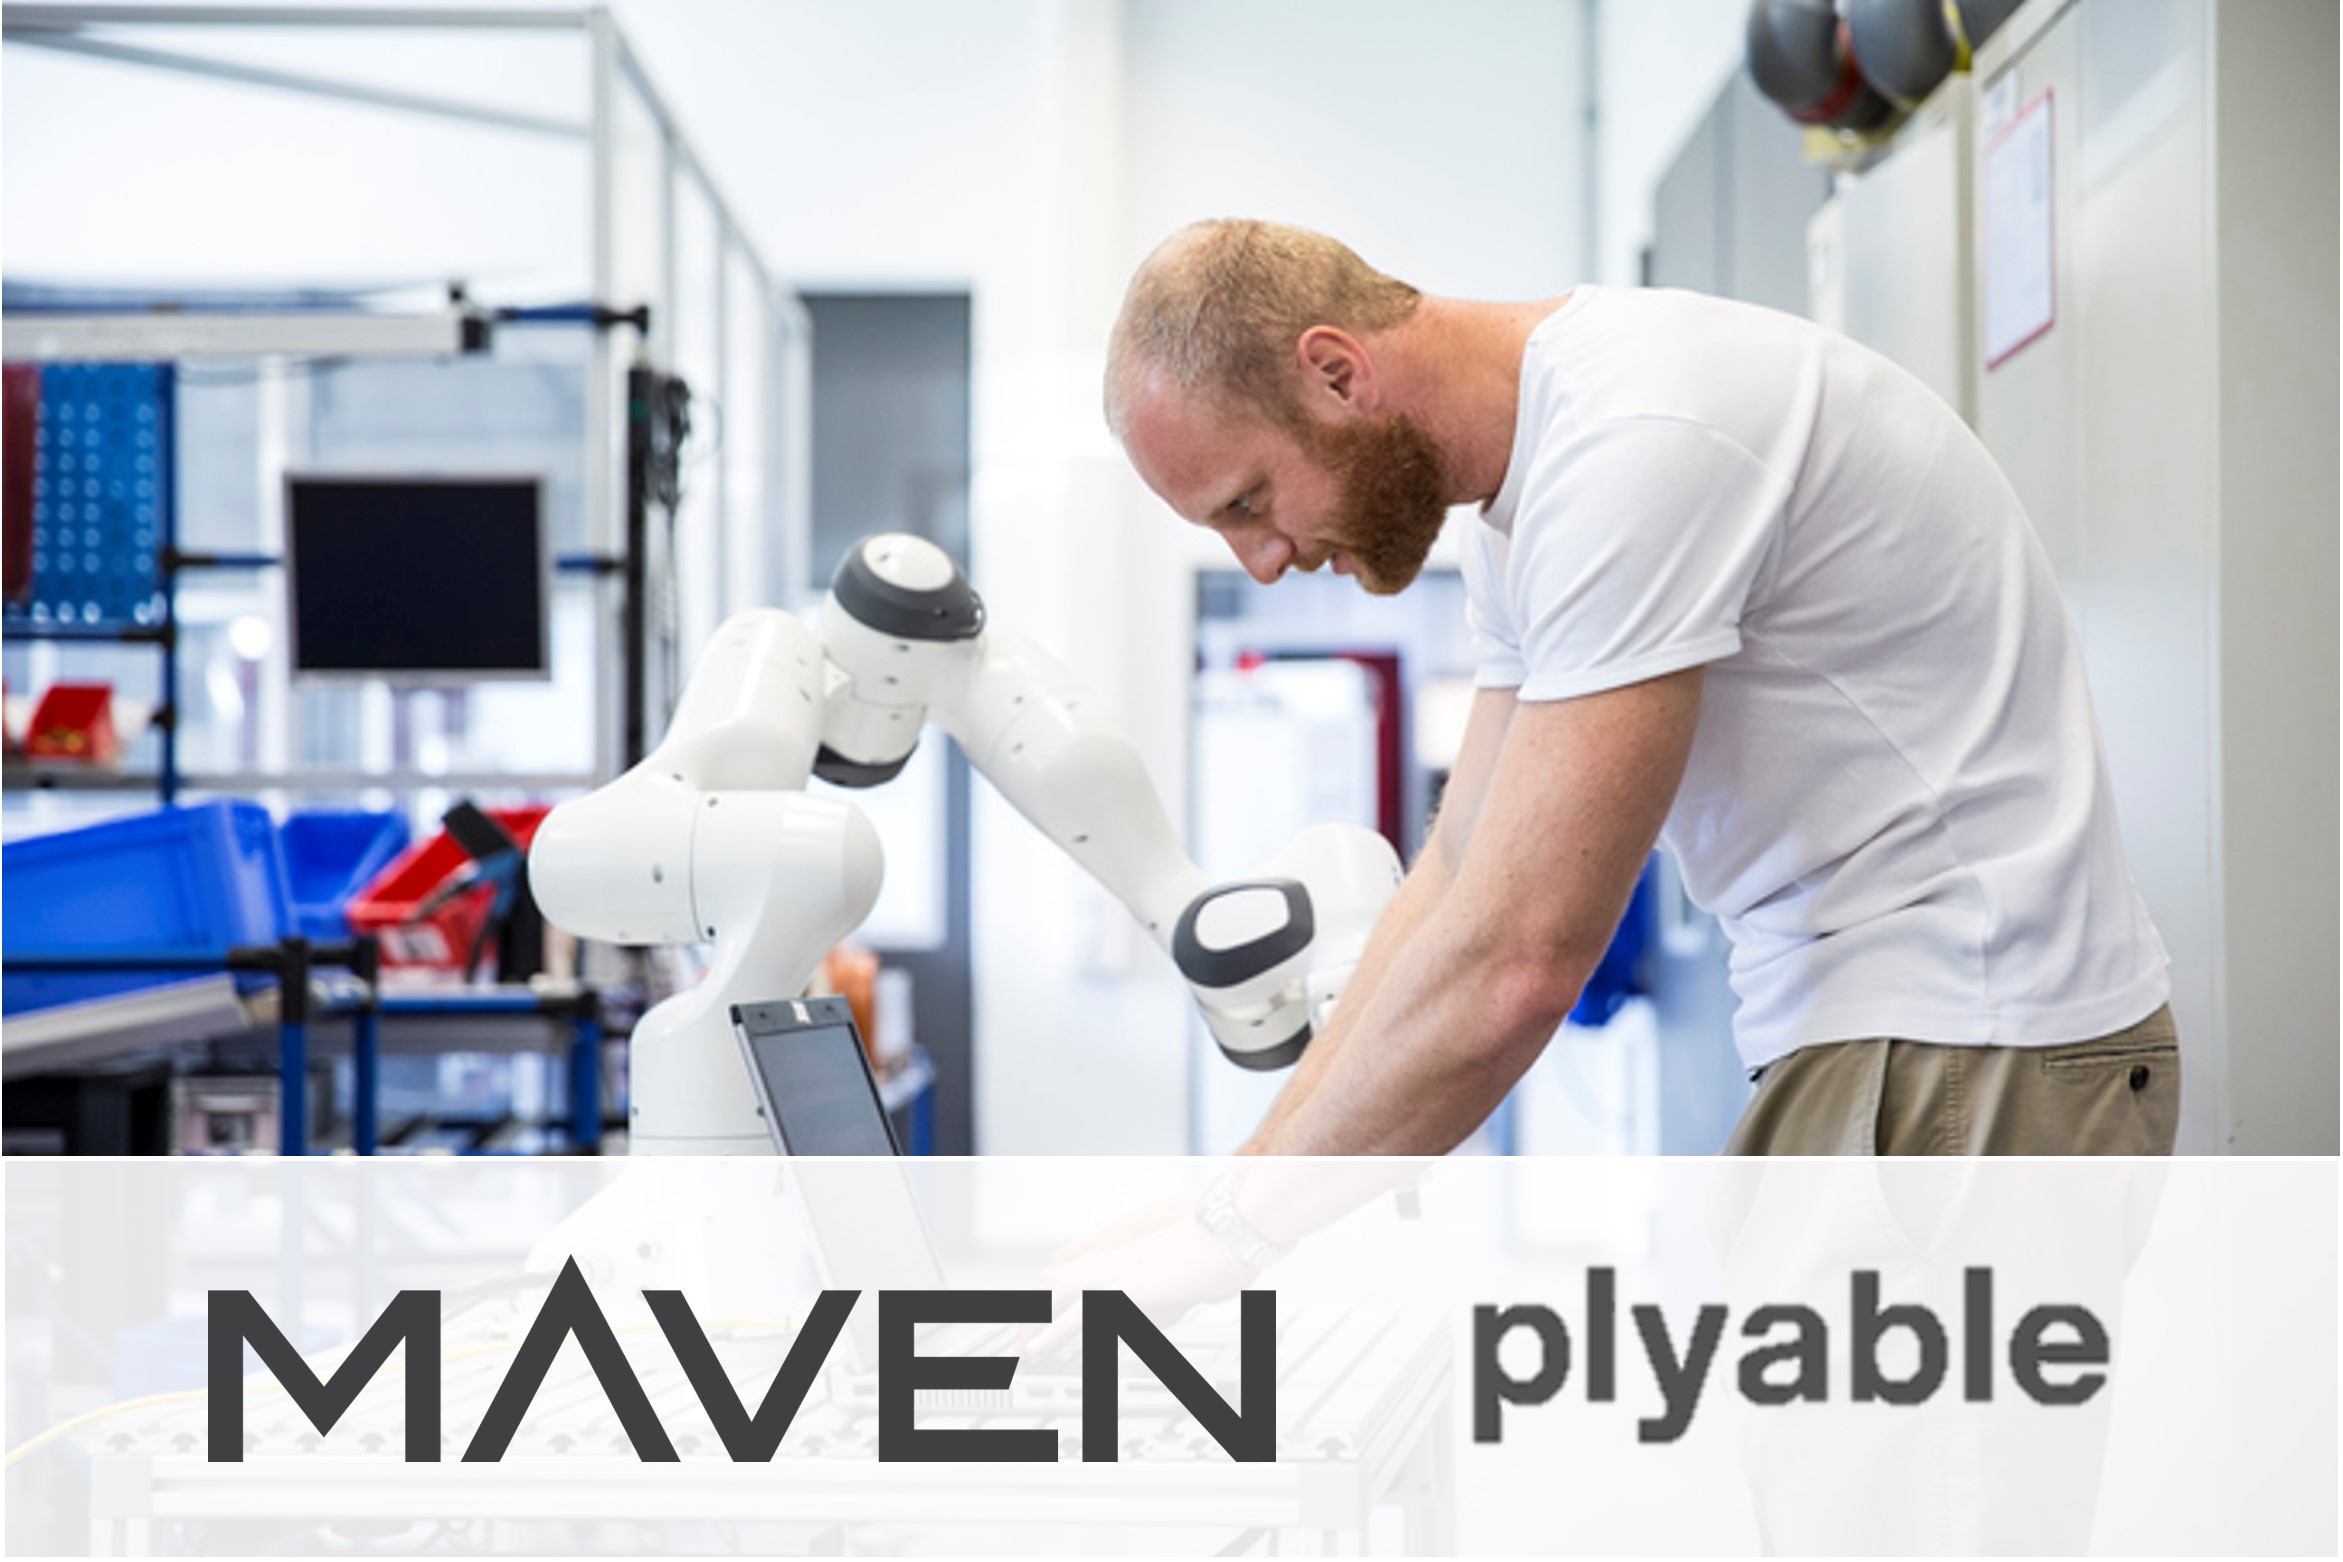 Luminii provides CDD support to Maven on their investment in Plyable